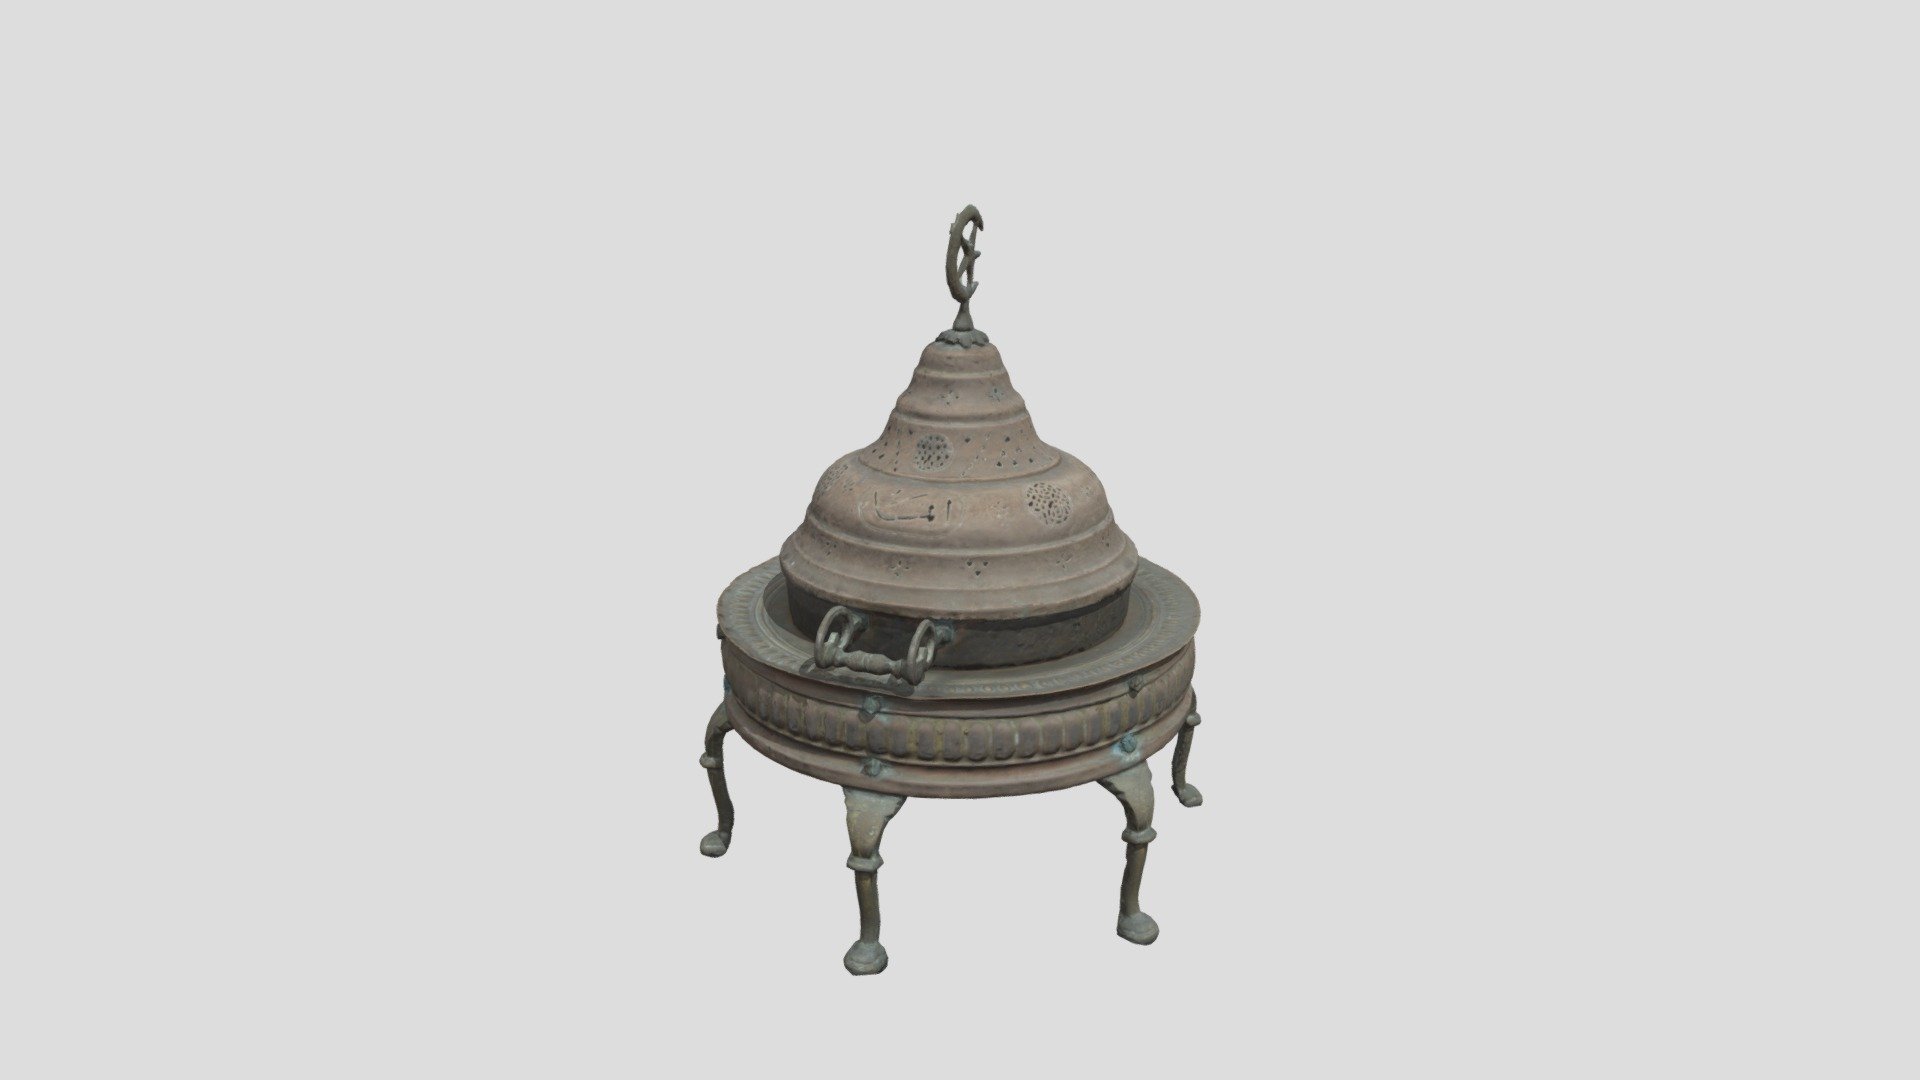 This object was used as a brazier and consists of 3 parts, a base, an inner container and a lid. The base rests on 6 feet with decoration all around. On top there is a free-standing copper container, in which the fuel was placed, with two cast bronze handles for easy removal. The brazier was sealed with a domed copper lid, on the top of which there is a bronze star with the crescent moon. The star served both as a handle for the lid and as a decorative element that indicated the Turkish origin of the brazier. Similar types of braziers are available with several variations in their decoration, indicative of the importance given to this object by craftsmen in their effort to satisfy their wealthy customers. Copper braziers of this type were used in urban houses in Cyprus as a necessary item-furniture during the period of Ottoman rule.

This is a preview of a reconstructed model from the George and Nefeli Giabra Pierides Ethnographic Collection at Bank of Cyprus Cultural Foundation 3d model